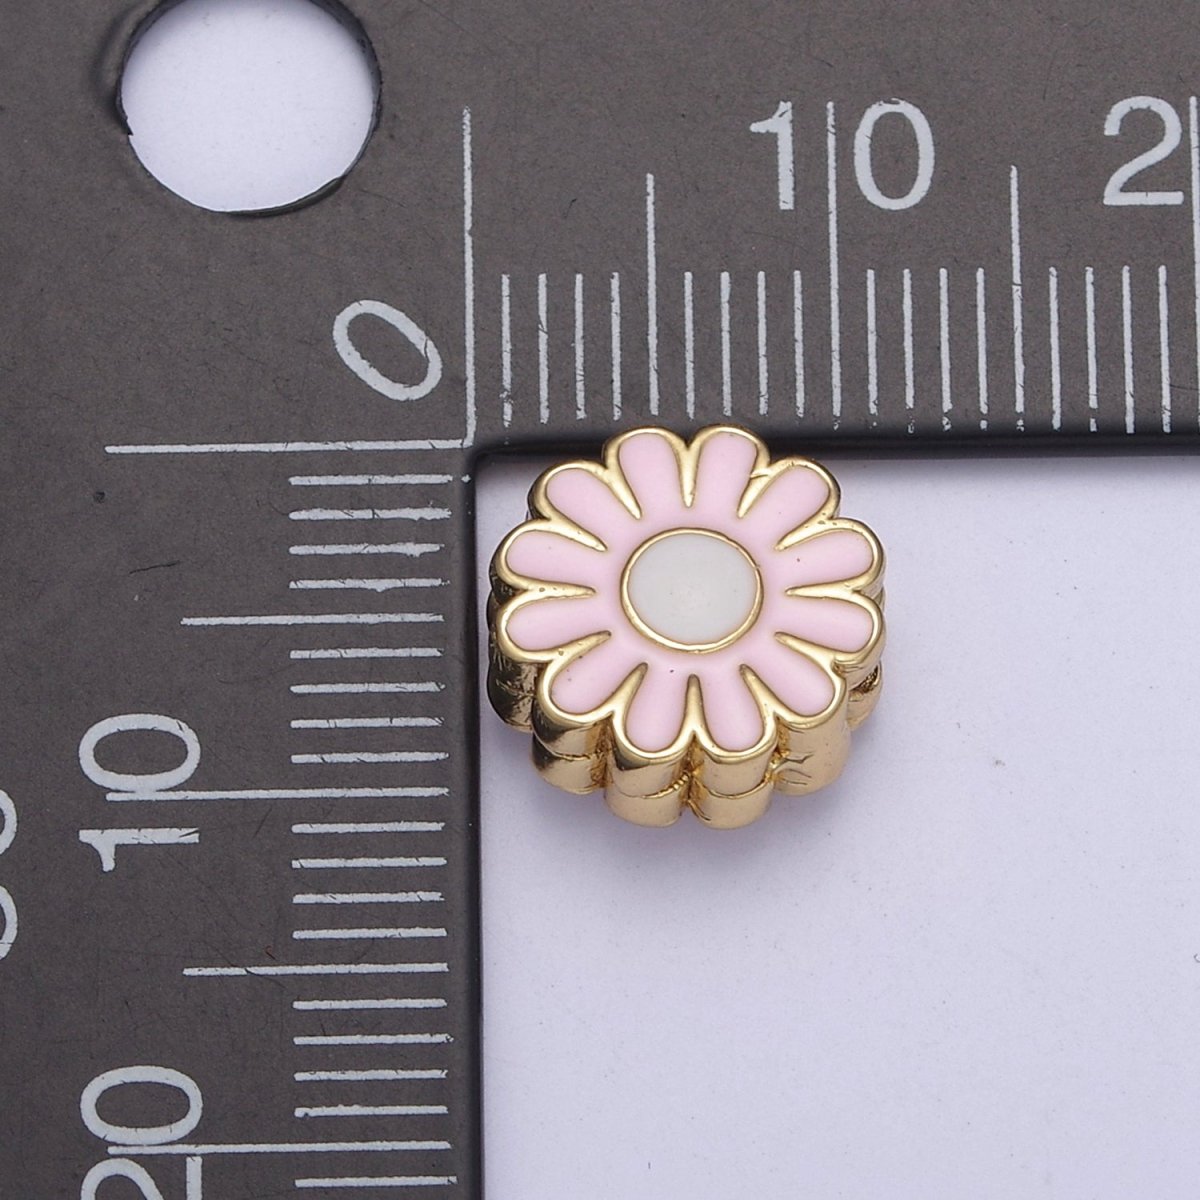 10mm Daisy Flower Bead Spacer Pink Mini Floral Nature Gold Filled Art Jewelry Making Beads B-773 - DLUXCA